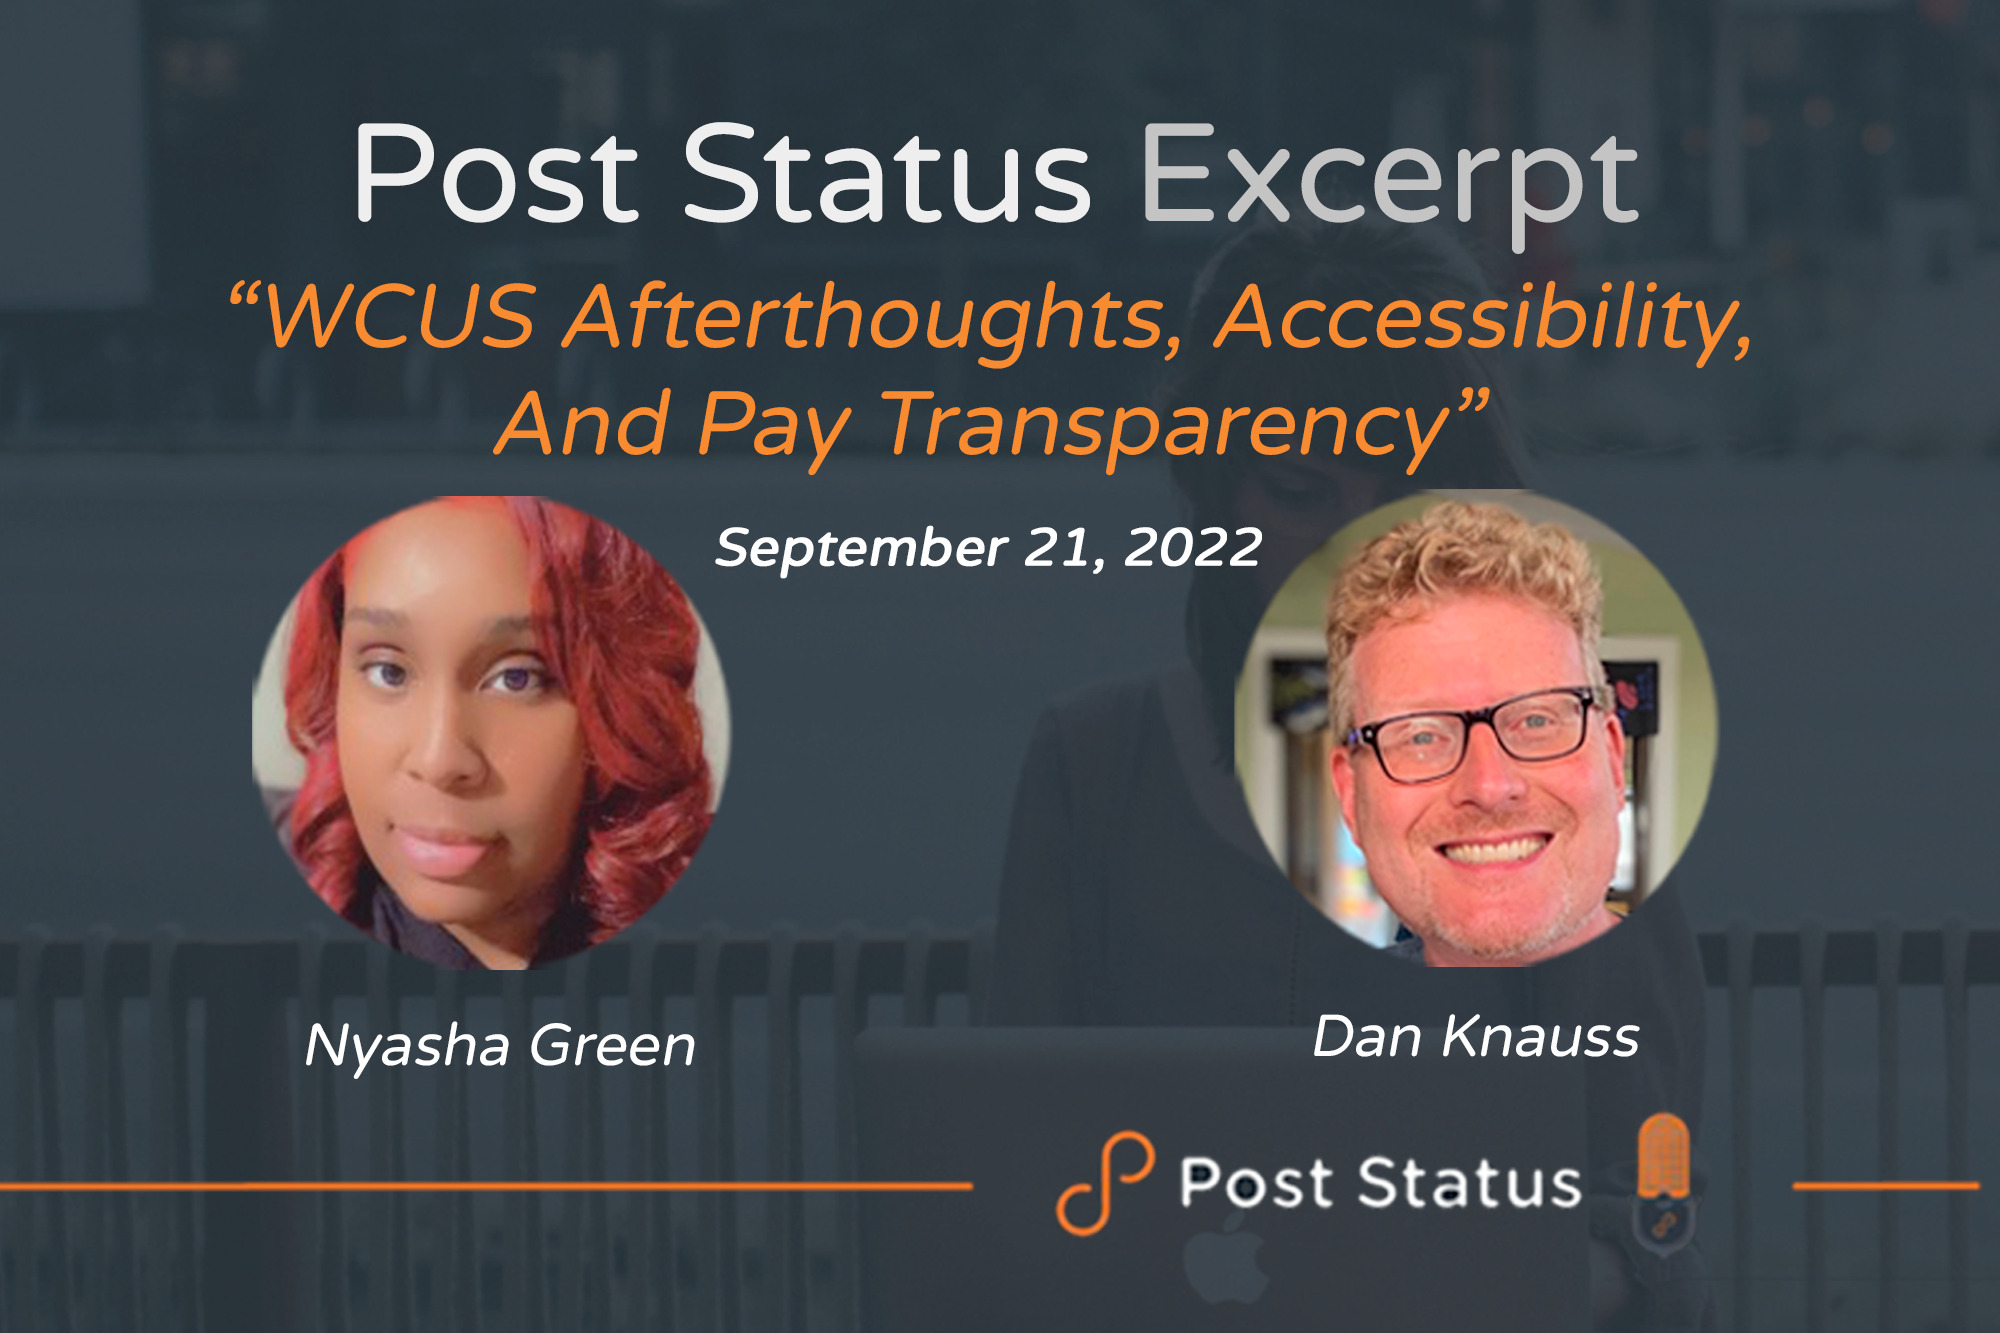 Post Status Excerpt (No. 69) — WCUS Afterthoughts, Accessibility, and Pay Transparency